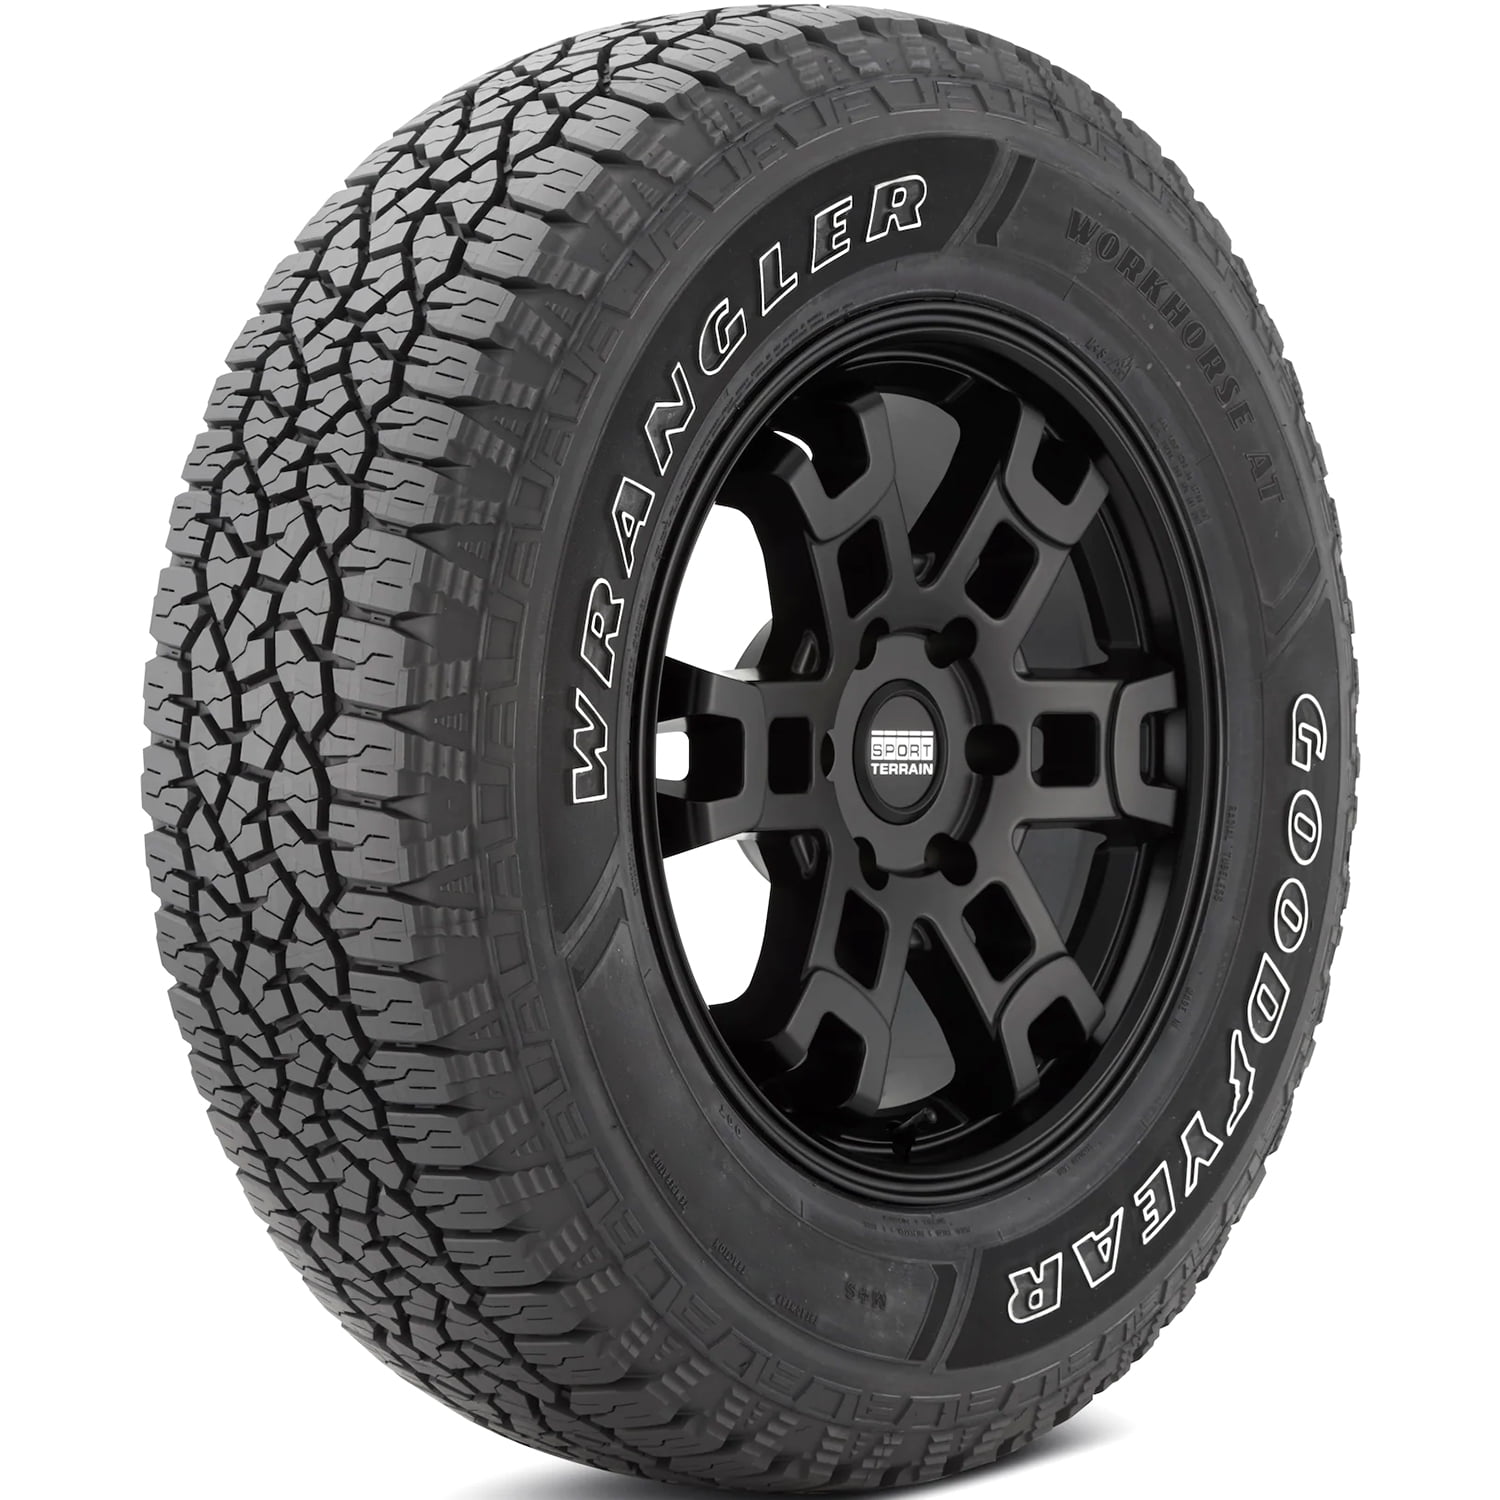 goodyear-wrangler-workhorse-at-255-70r16-111s-a-t-all-terrain-tire